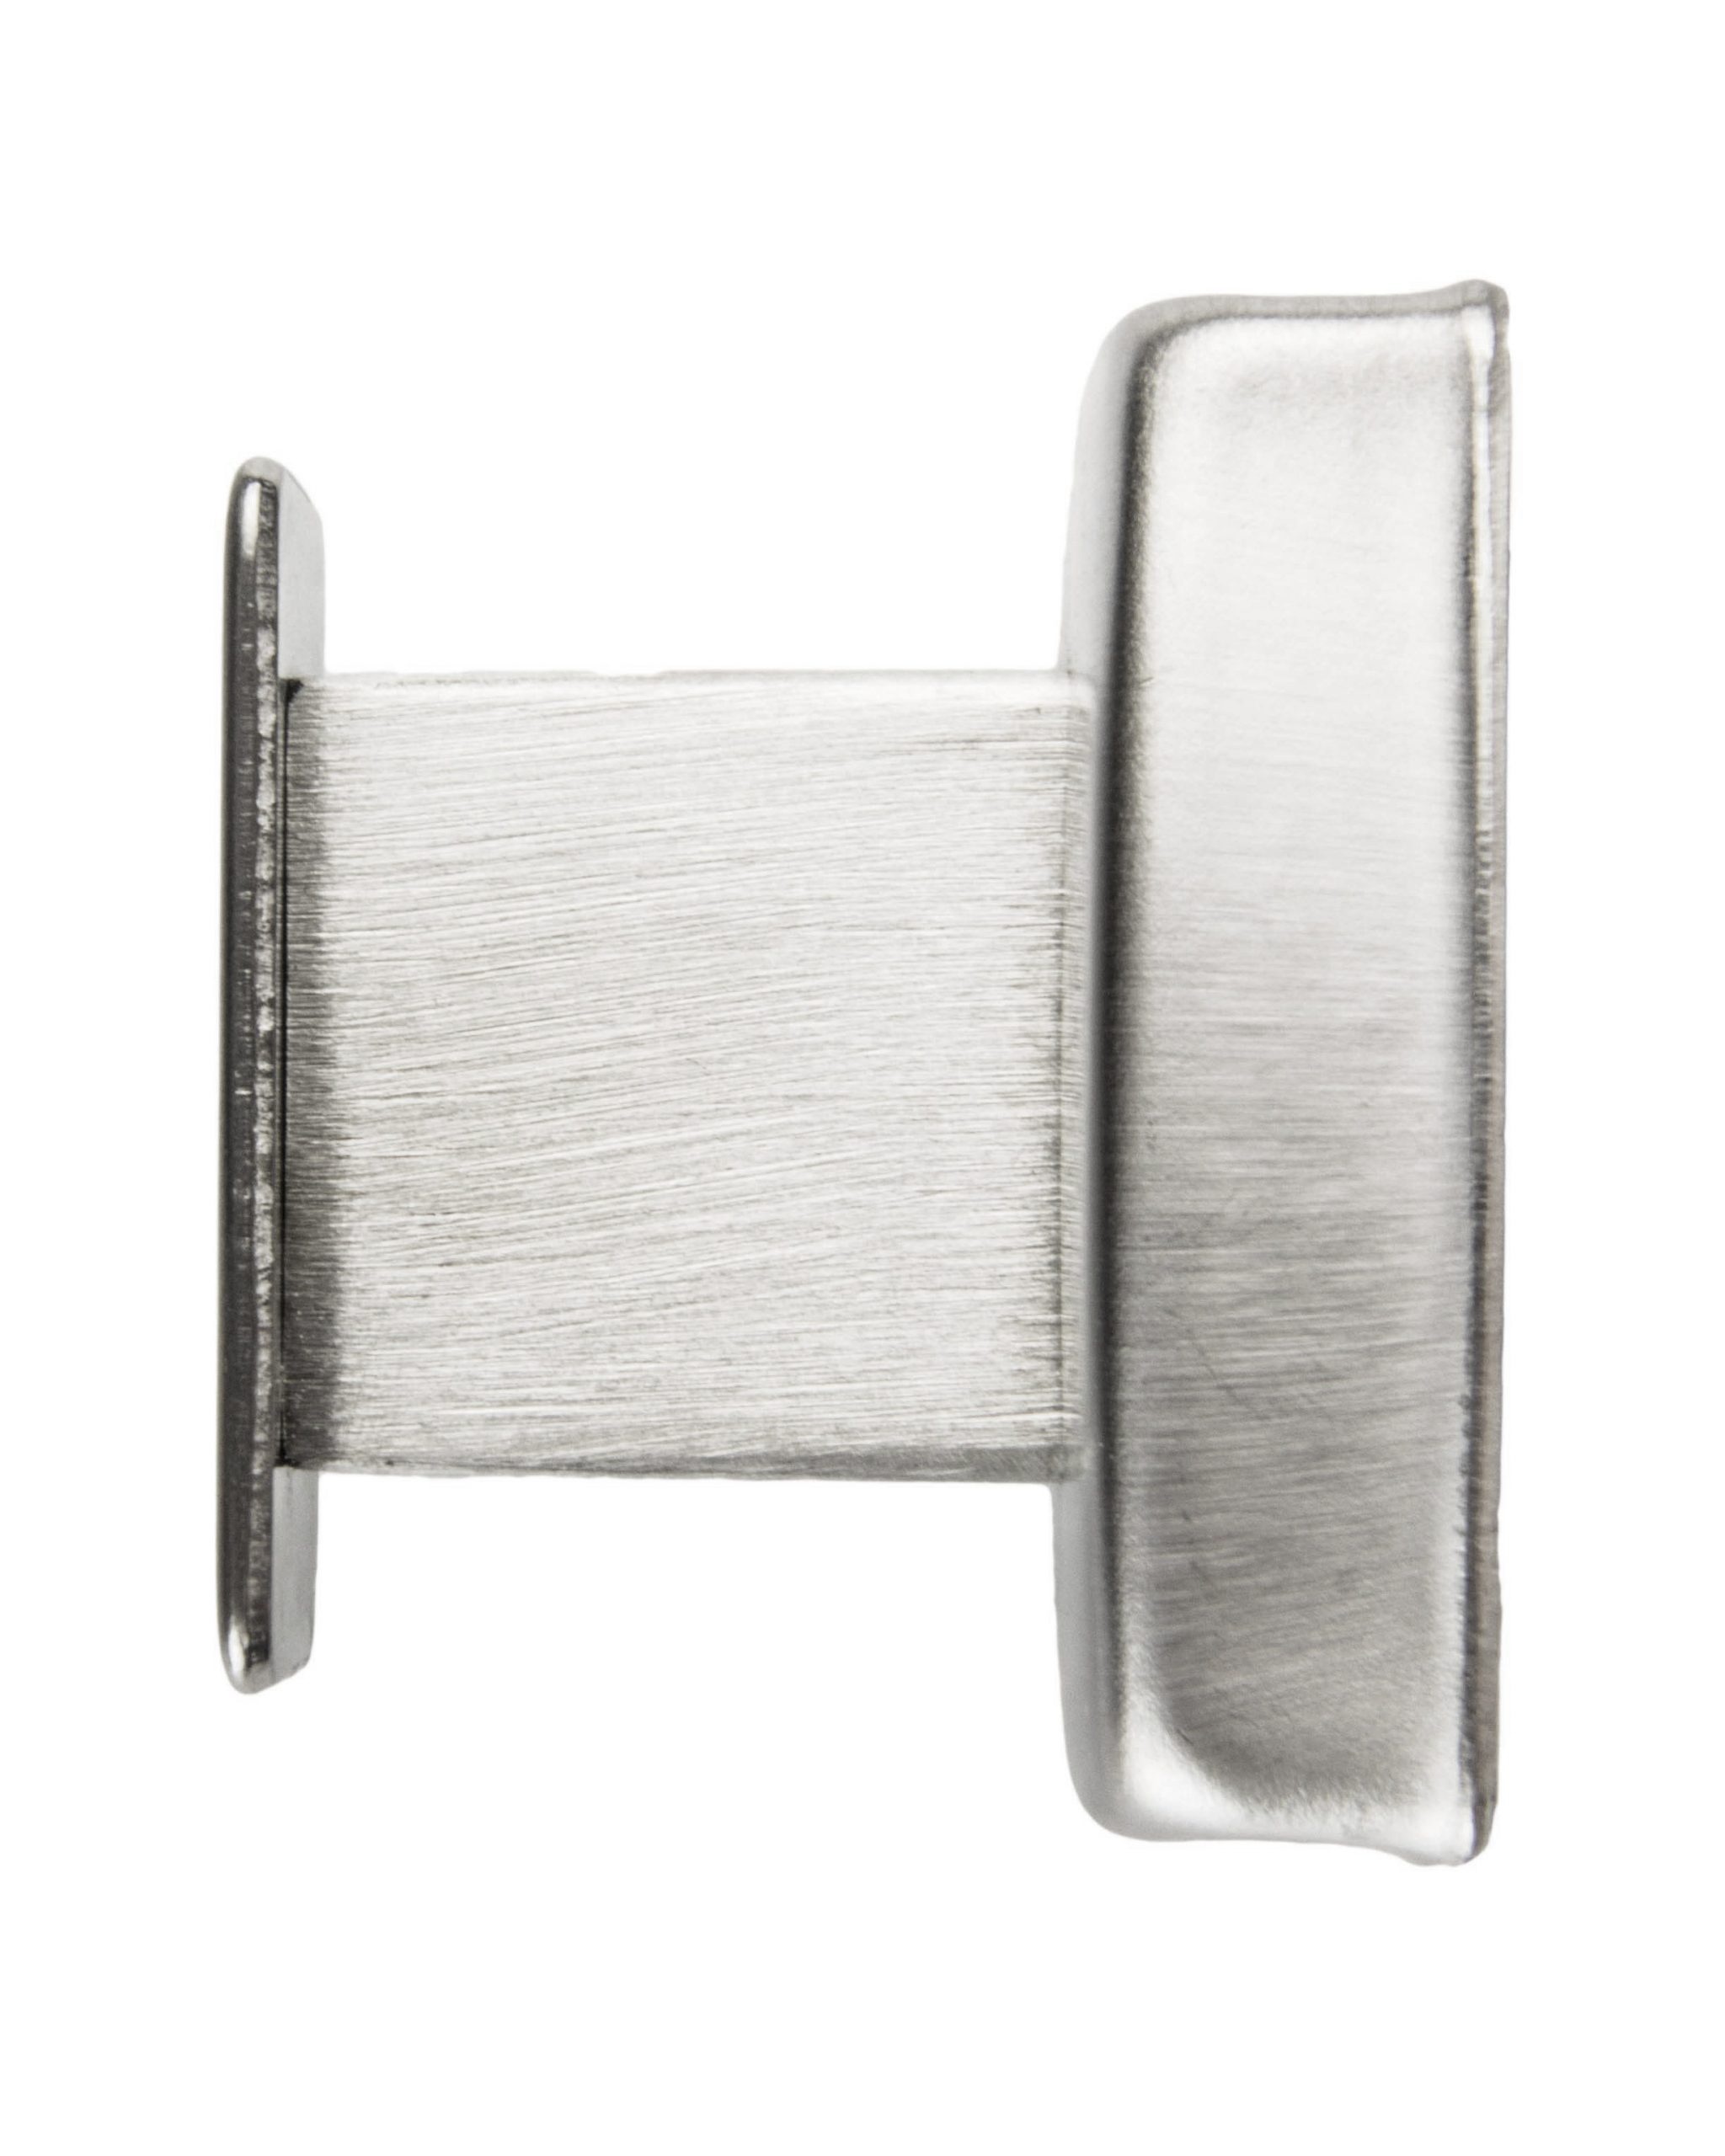 Stainless Steel Robe Hook – Frost